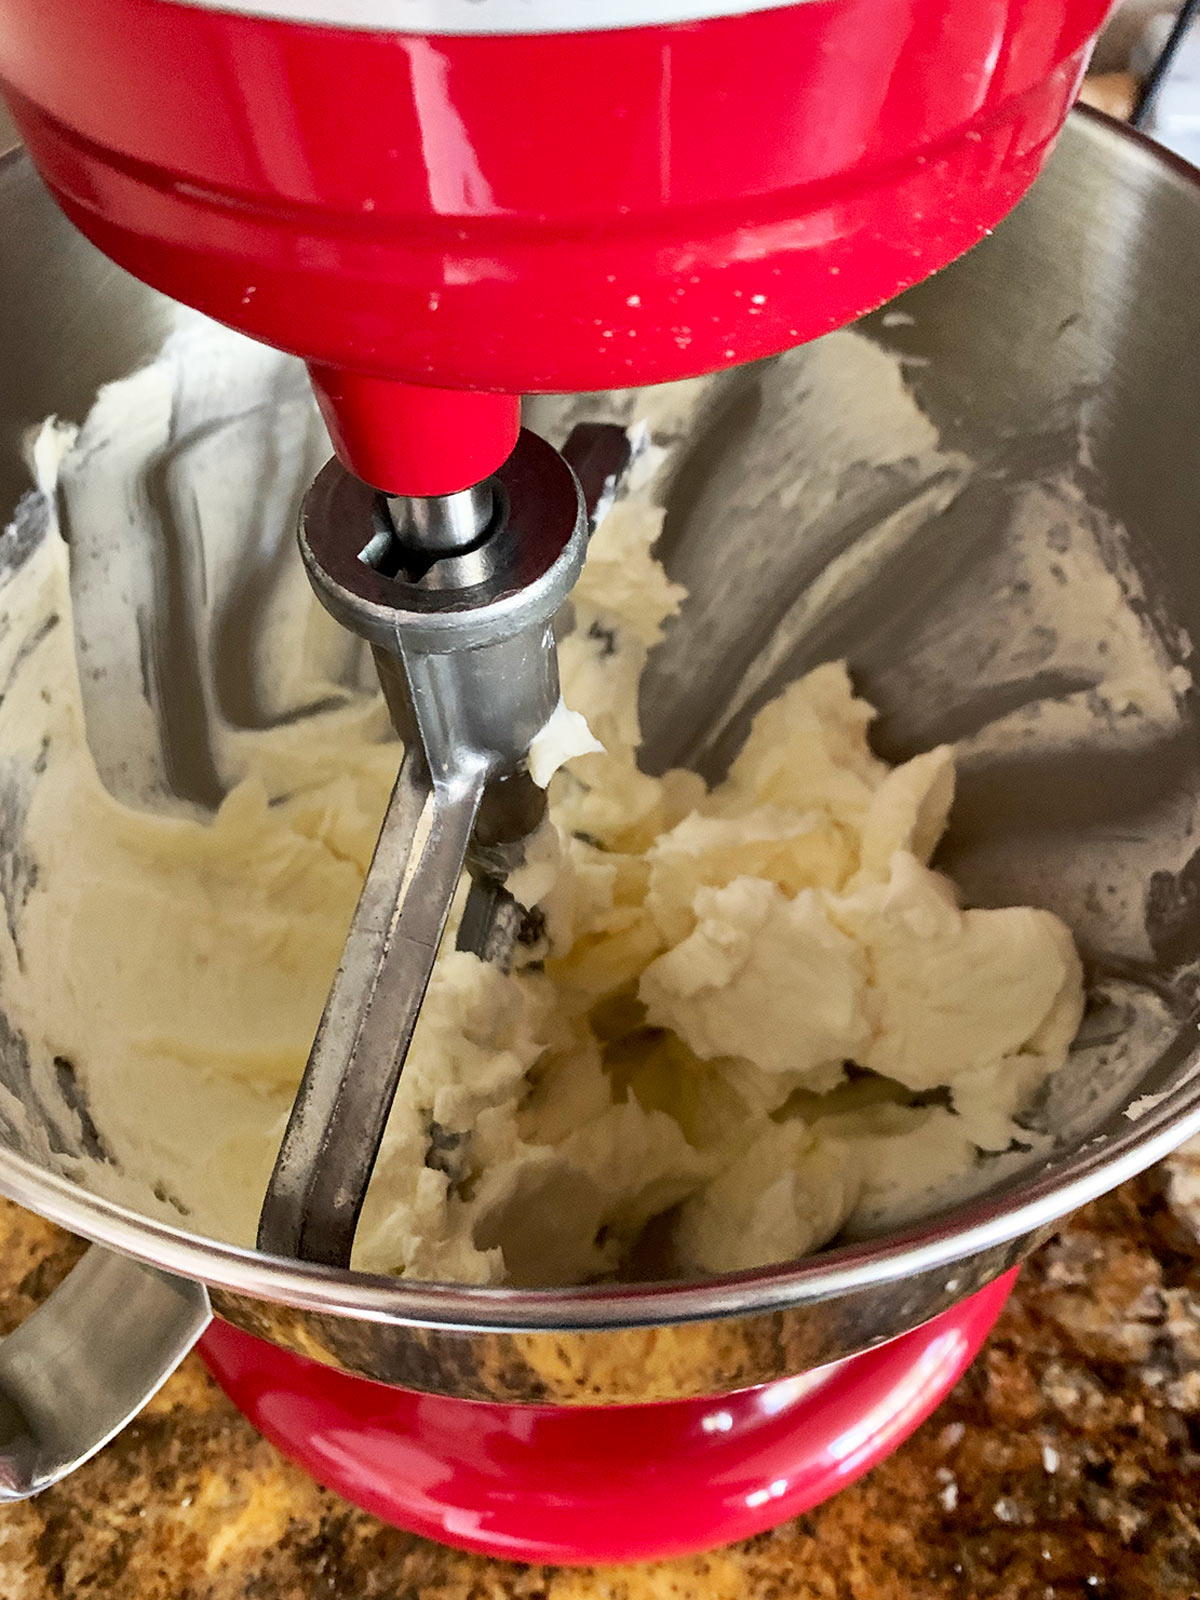 Cream cheese and sugar being combined in a red stand mixer with paddle attachment.